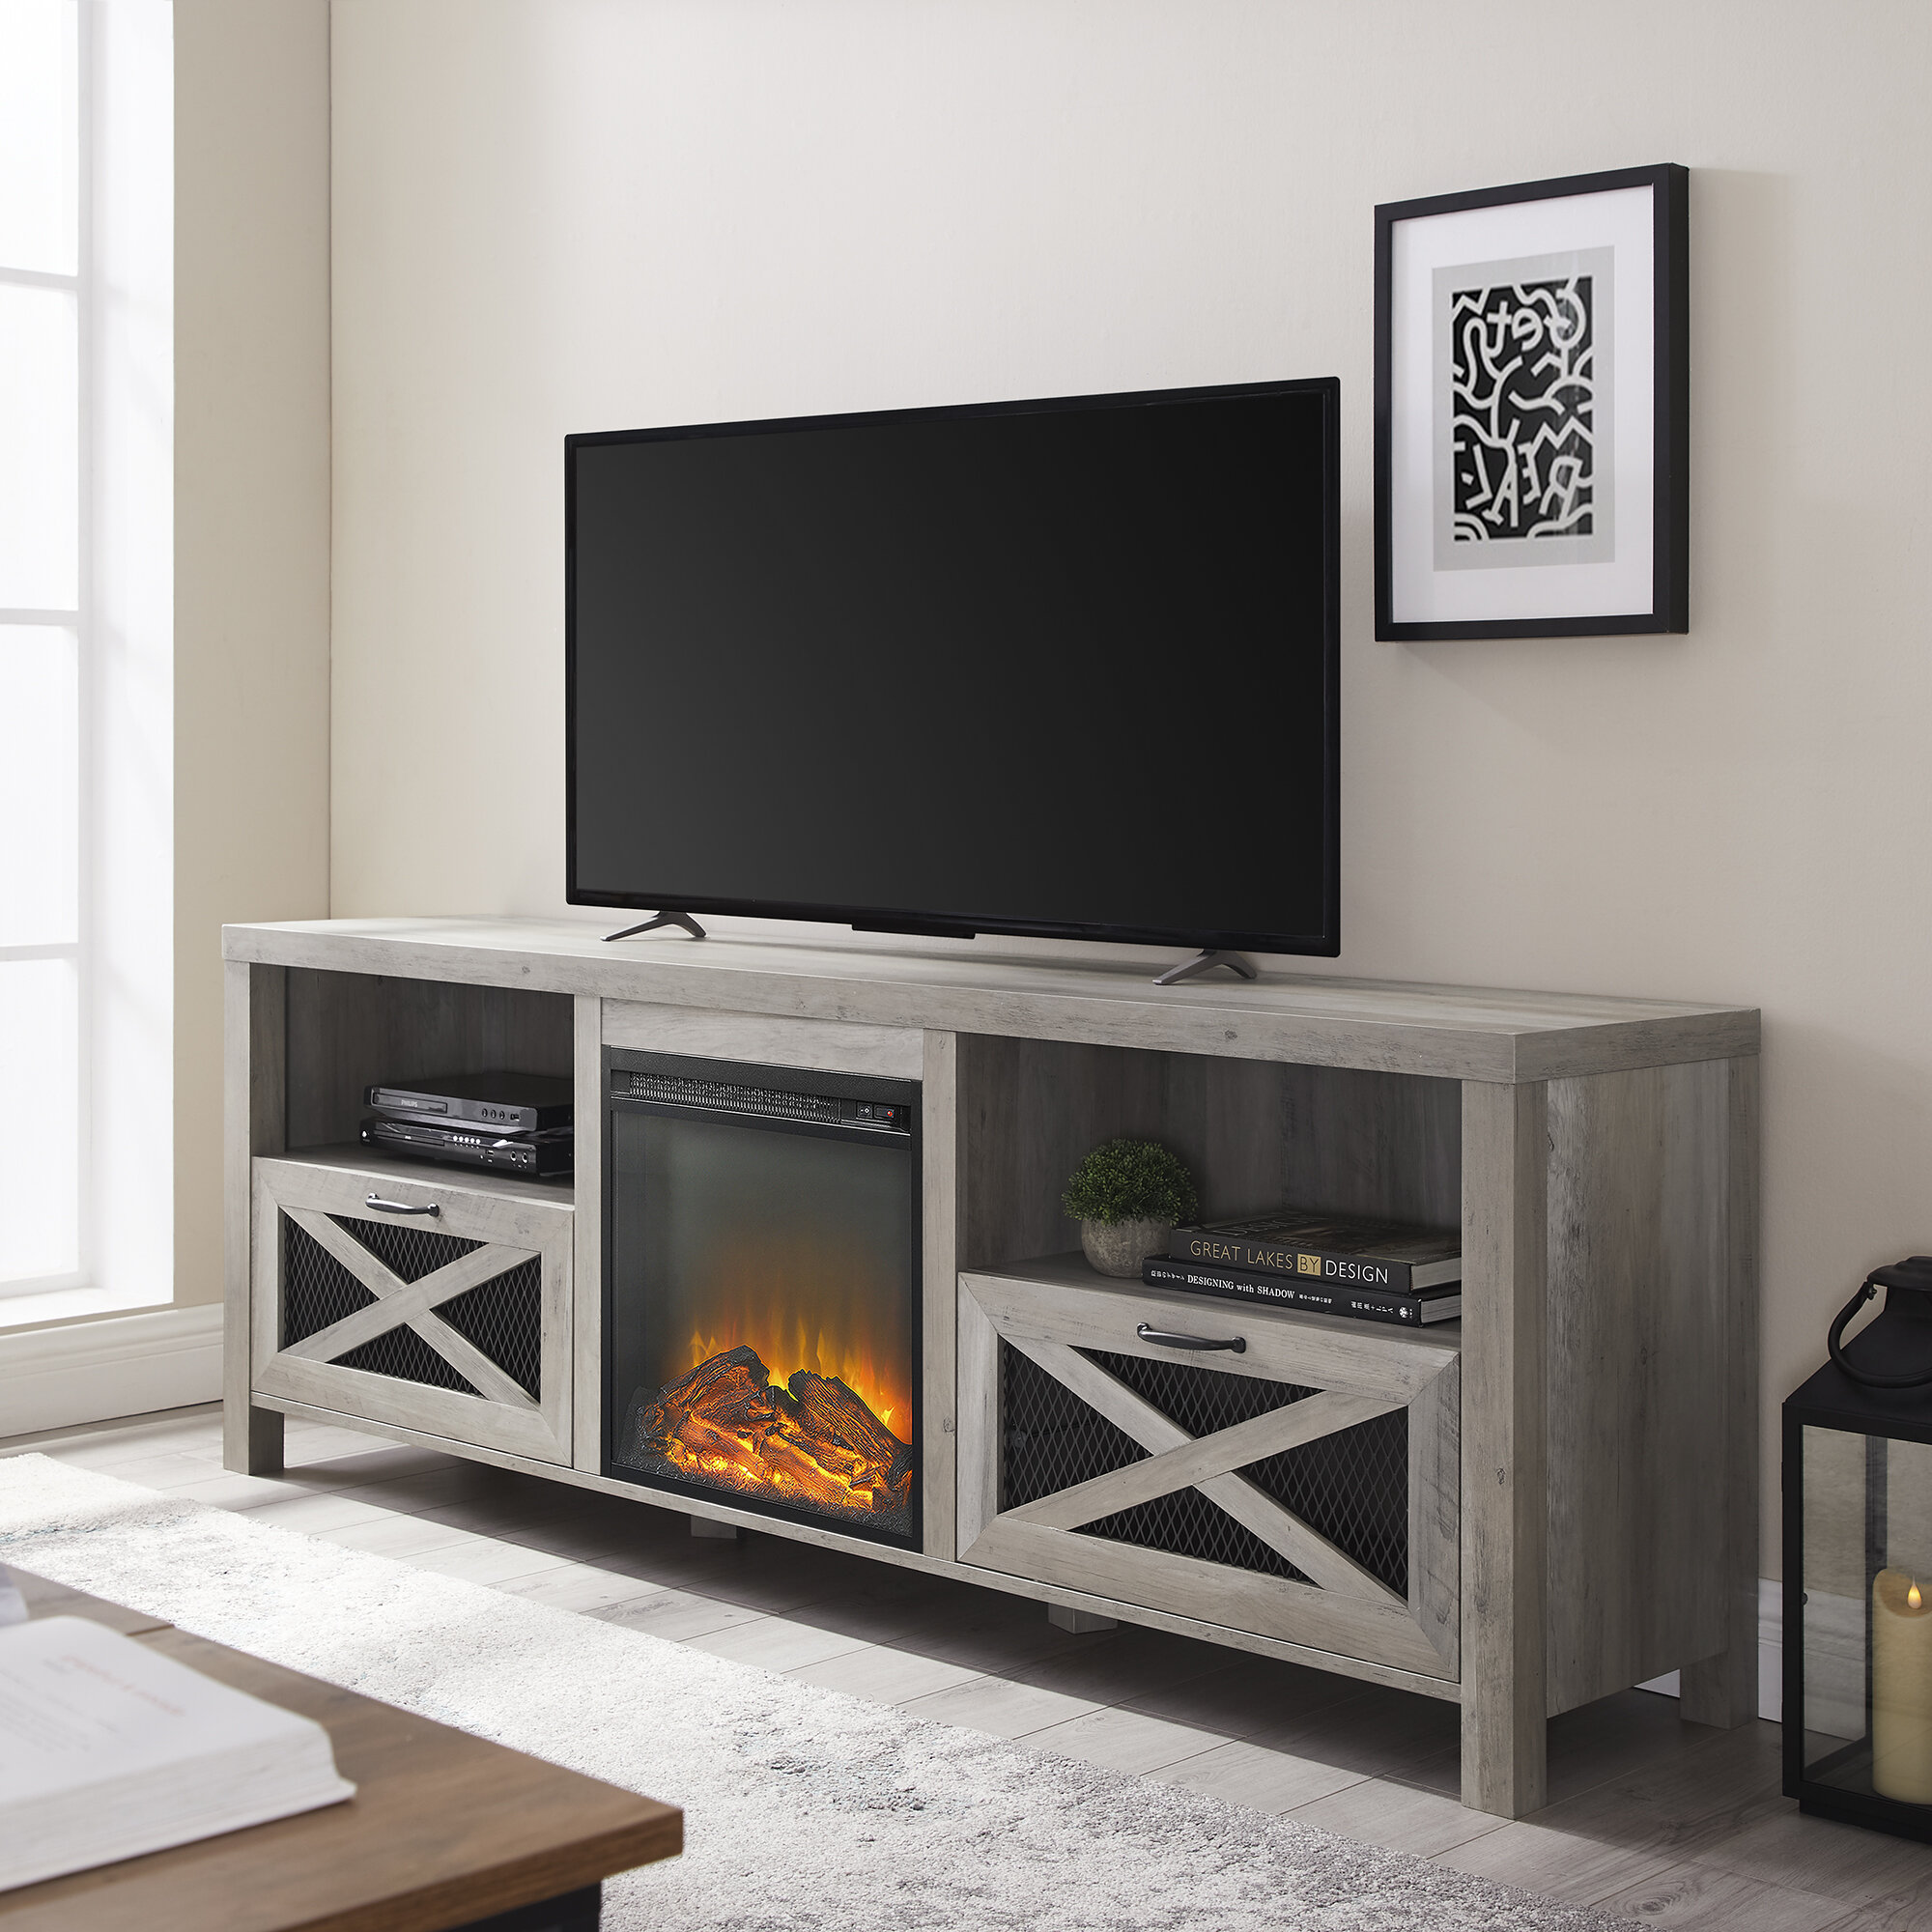 Tv Over Wood Burning Fireplace Luxury Tansey Tv Stand for Tvs Up to 70" with Electric Fireplace